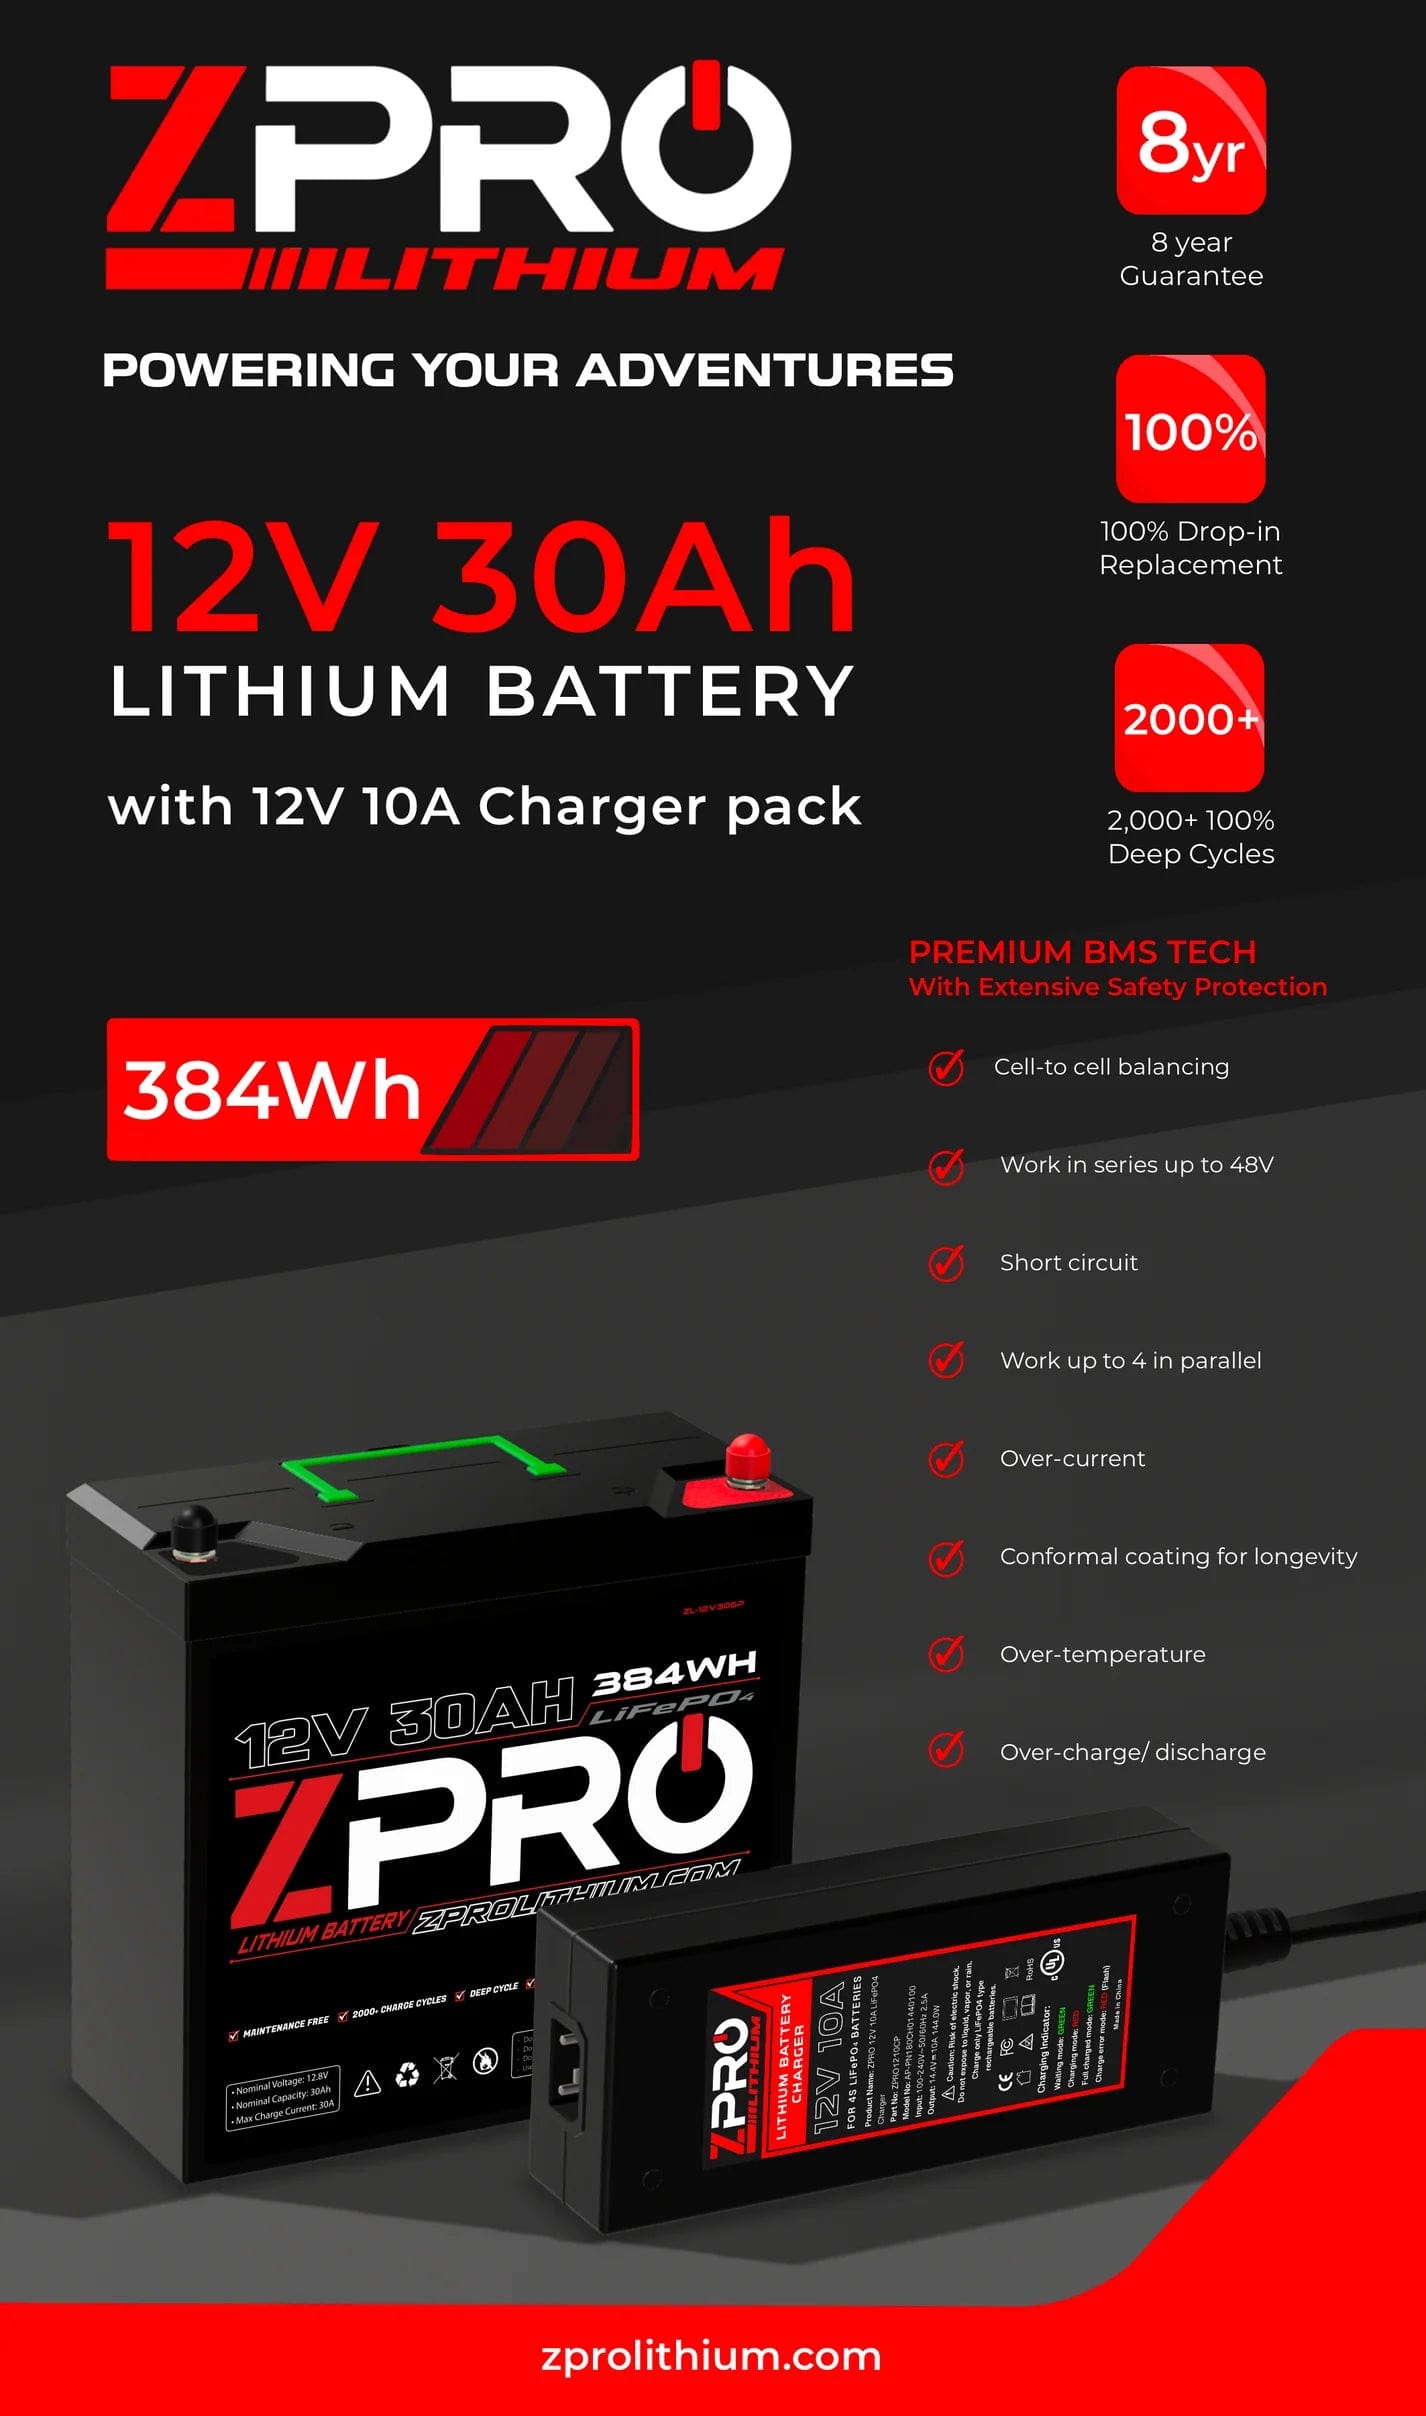 ZPro 12v 30ah Lithium Battery with Charger